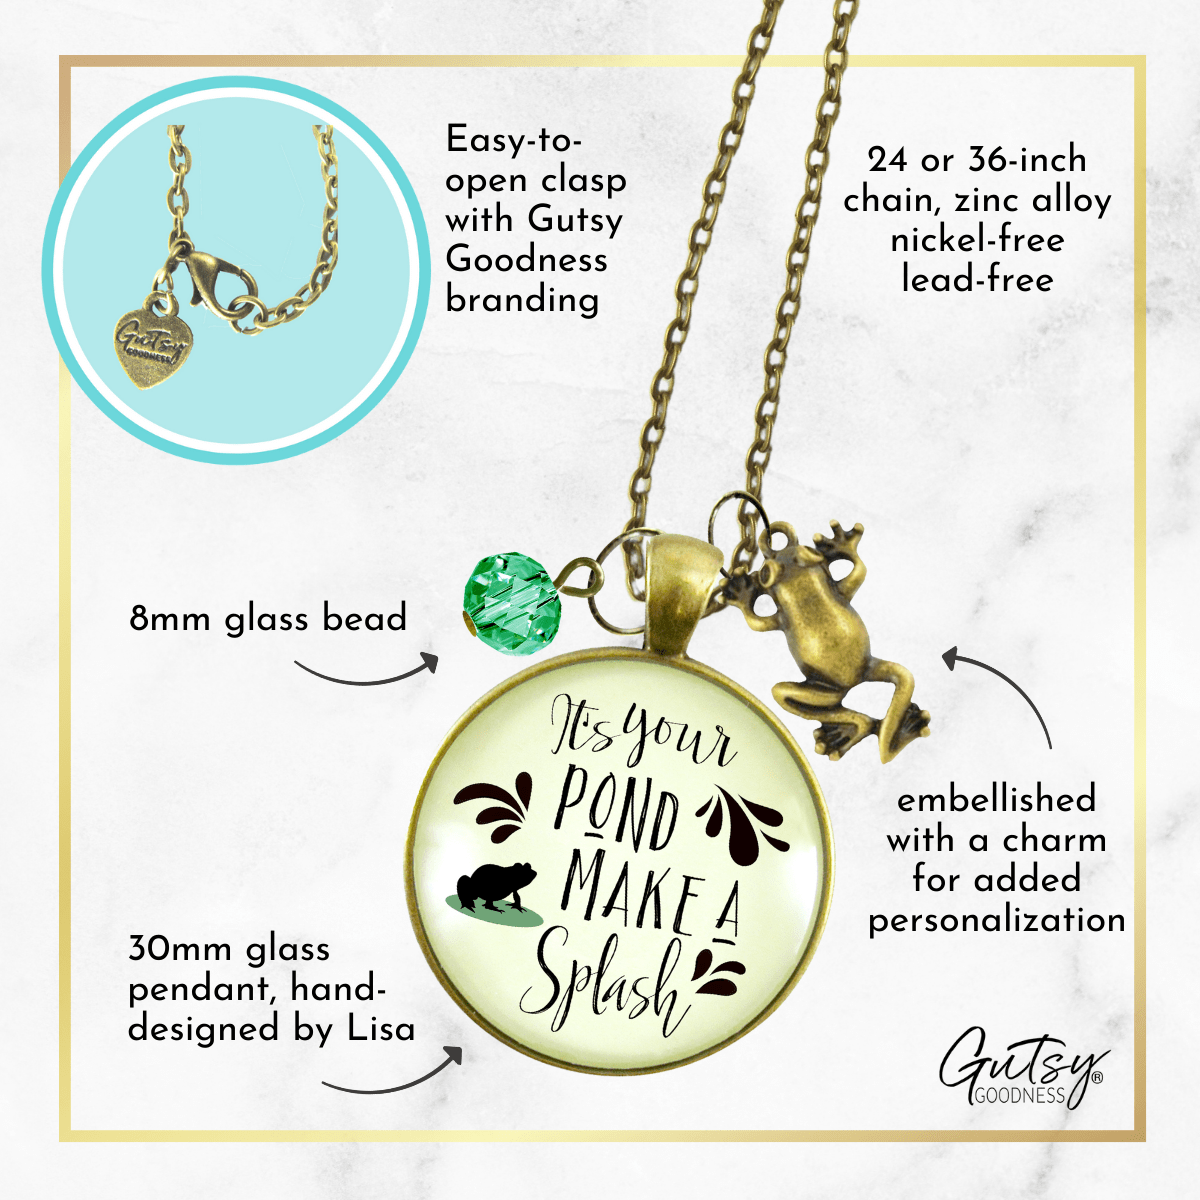 Gutsy Goodness Frog Necklace It's Your Pond Make a Splash Success Life Quote Jewelry - Gutsy Goodness Handmade Jewelry;Frog Necklace It's Your Pond Make A Splash Success Life Quote Jewelry - Gutsy Goodness Handmade Jewelry Gifts